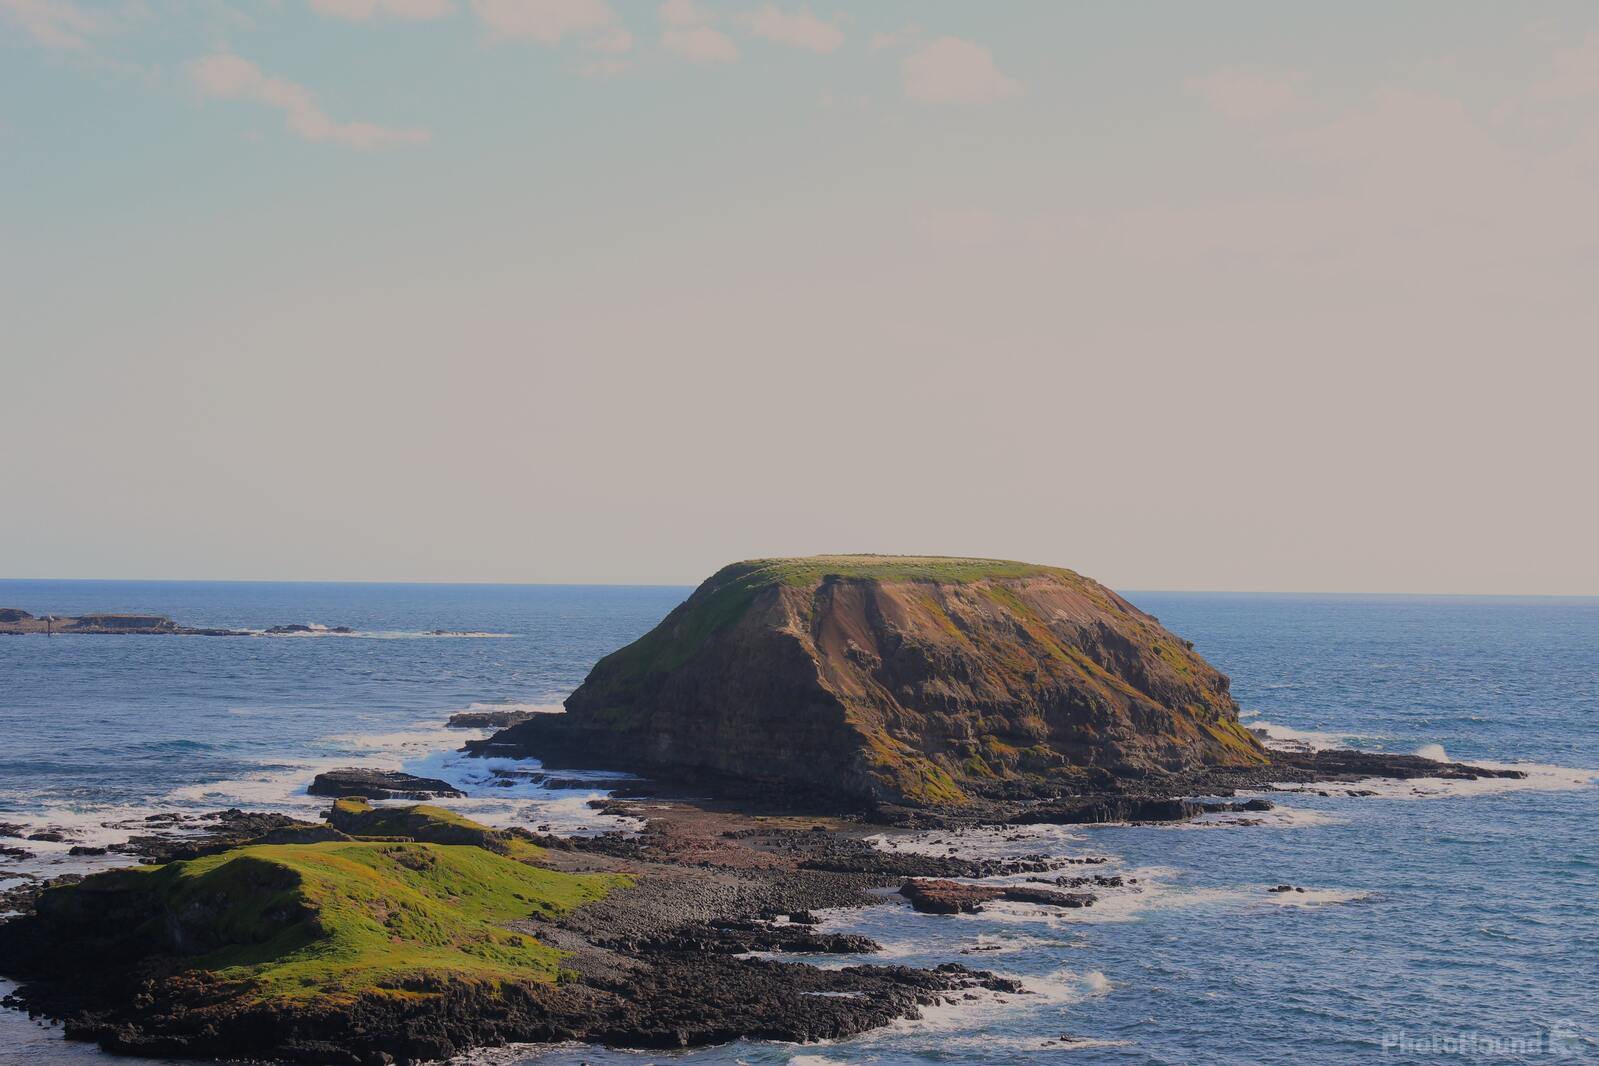 Image of Round Island from The Nobbies Viewpoint by Team PhotoHound